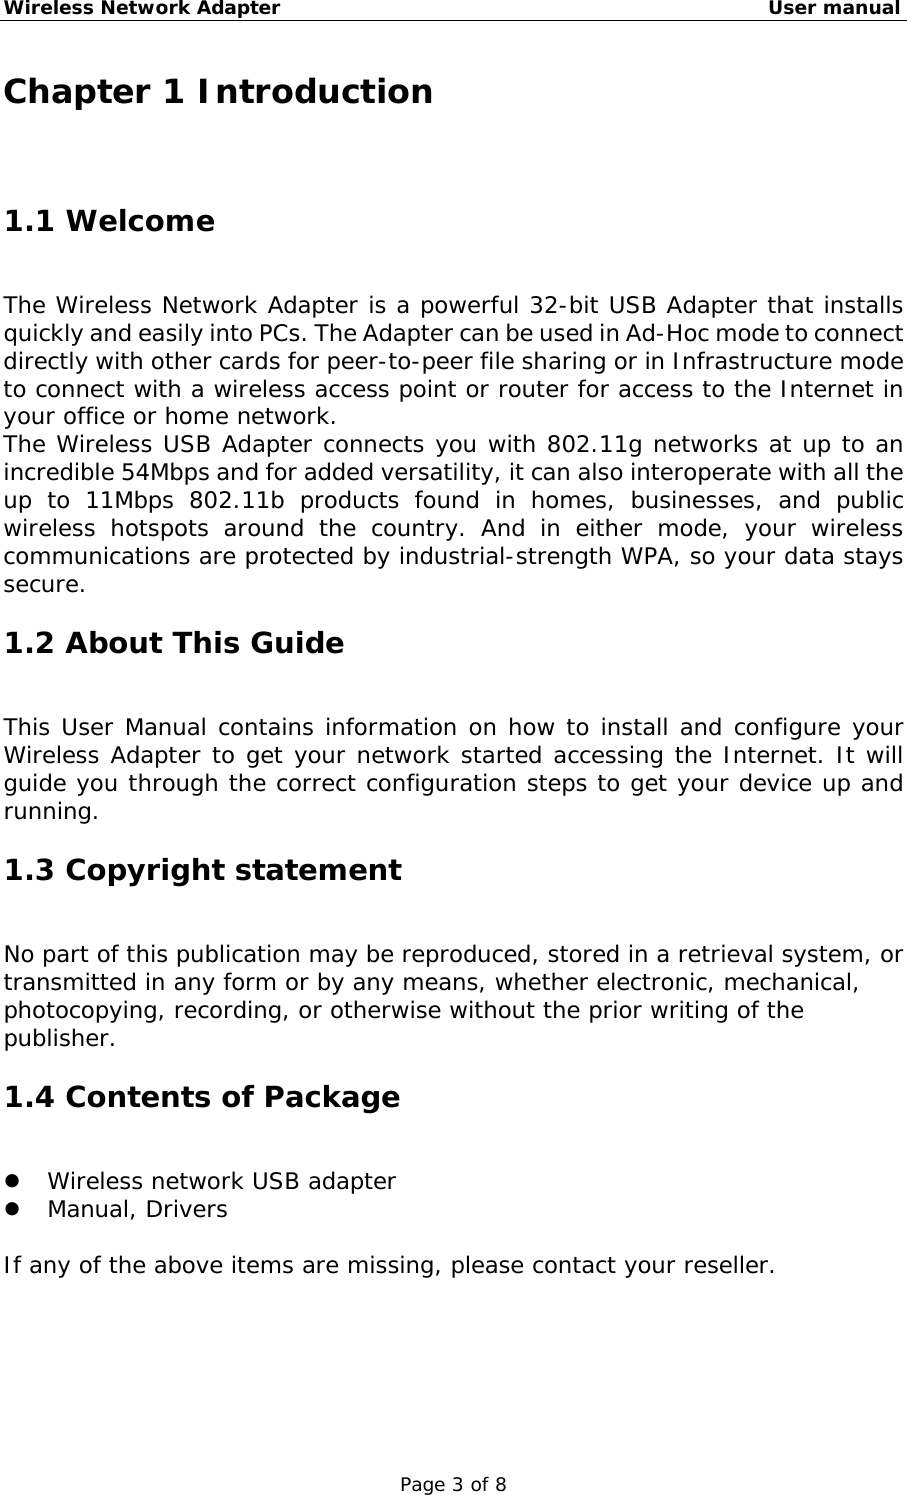 Wireless Network Adapter                                                    User manual Page 3 of 8 Chapter 1 Introduction 1.1 Welcome The Wireless Network Adapter is a powerful 32-bit USB Adapter that installs quickly and easily into PCs. The Adapter can be used in Ad-Hoc mode to connect directly with other cards for peer-to-peer file sharing or in Infrastructure mode to connect with a wireless access point or router for access to the Internet in your office or home network. The Wireless USB Adapter connects you with 802.11g networks at up to an incredible 54Mbps and for added versatility, it can also interoperate with all the up to 11Mbps 802.11b products found in homes, businesses, and public wireless hotspots around the country. And in either mode, your wireless communications are protected by industrial-strength WPA, so your data stays secure. 1.2 About This Guide This User Manual contains information on how to install and configure your Wireless Adapter to get your network started accessing the Internet. It will guide you through the correct configuration steps to get your device up and running. 1.3 Copyright statement No part of this publication may be reproduced, stored in a retrieval system, or transmitted in any form or by any means, whether electronic, mechanical, photocopying, recording, or otherwise without the prior writing of the publisher. 1.4 Contents of Package   Wireless network USB adapter   Manual, Drivers   If any of the above items are missing, please contact your reseller. 